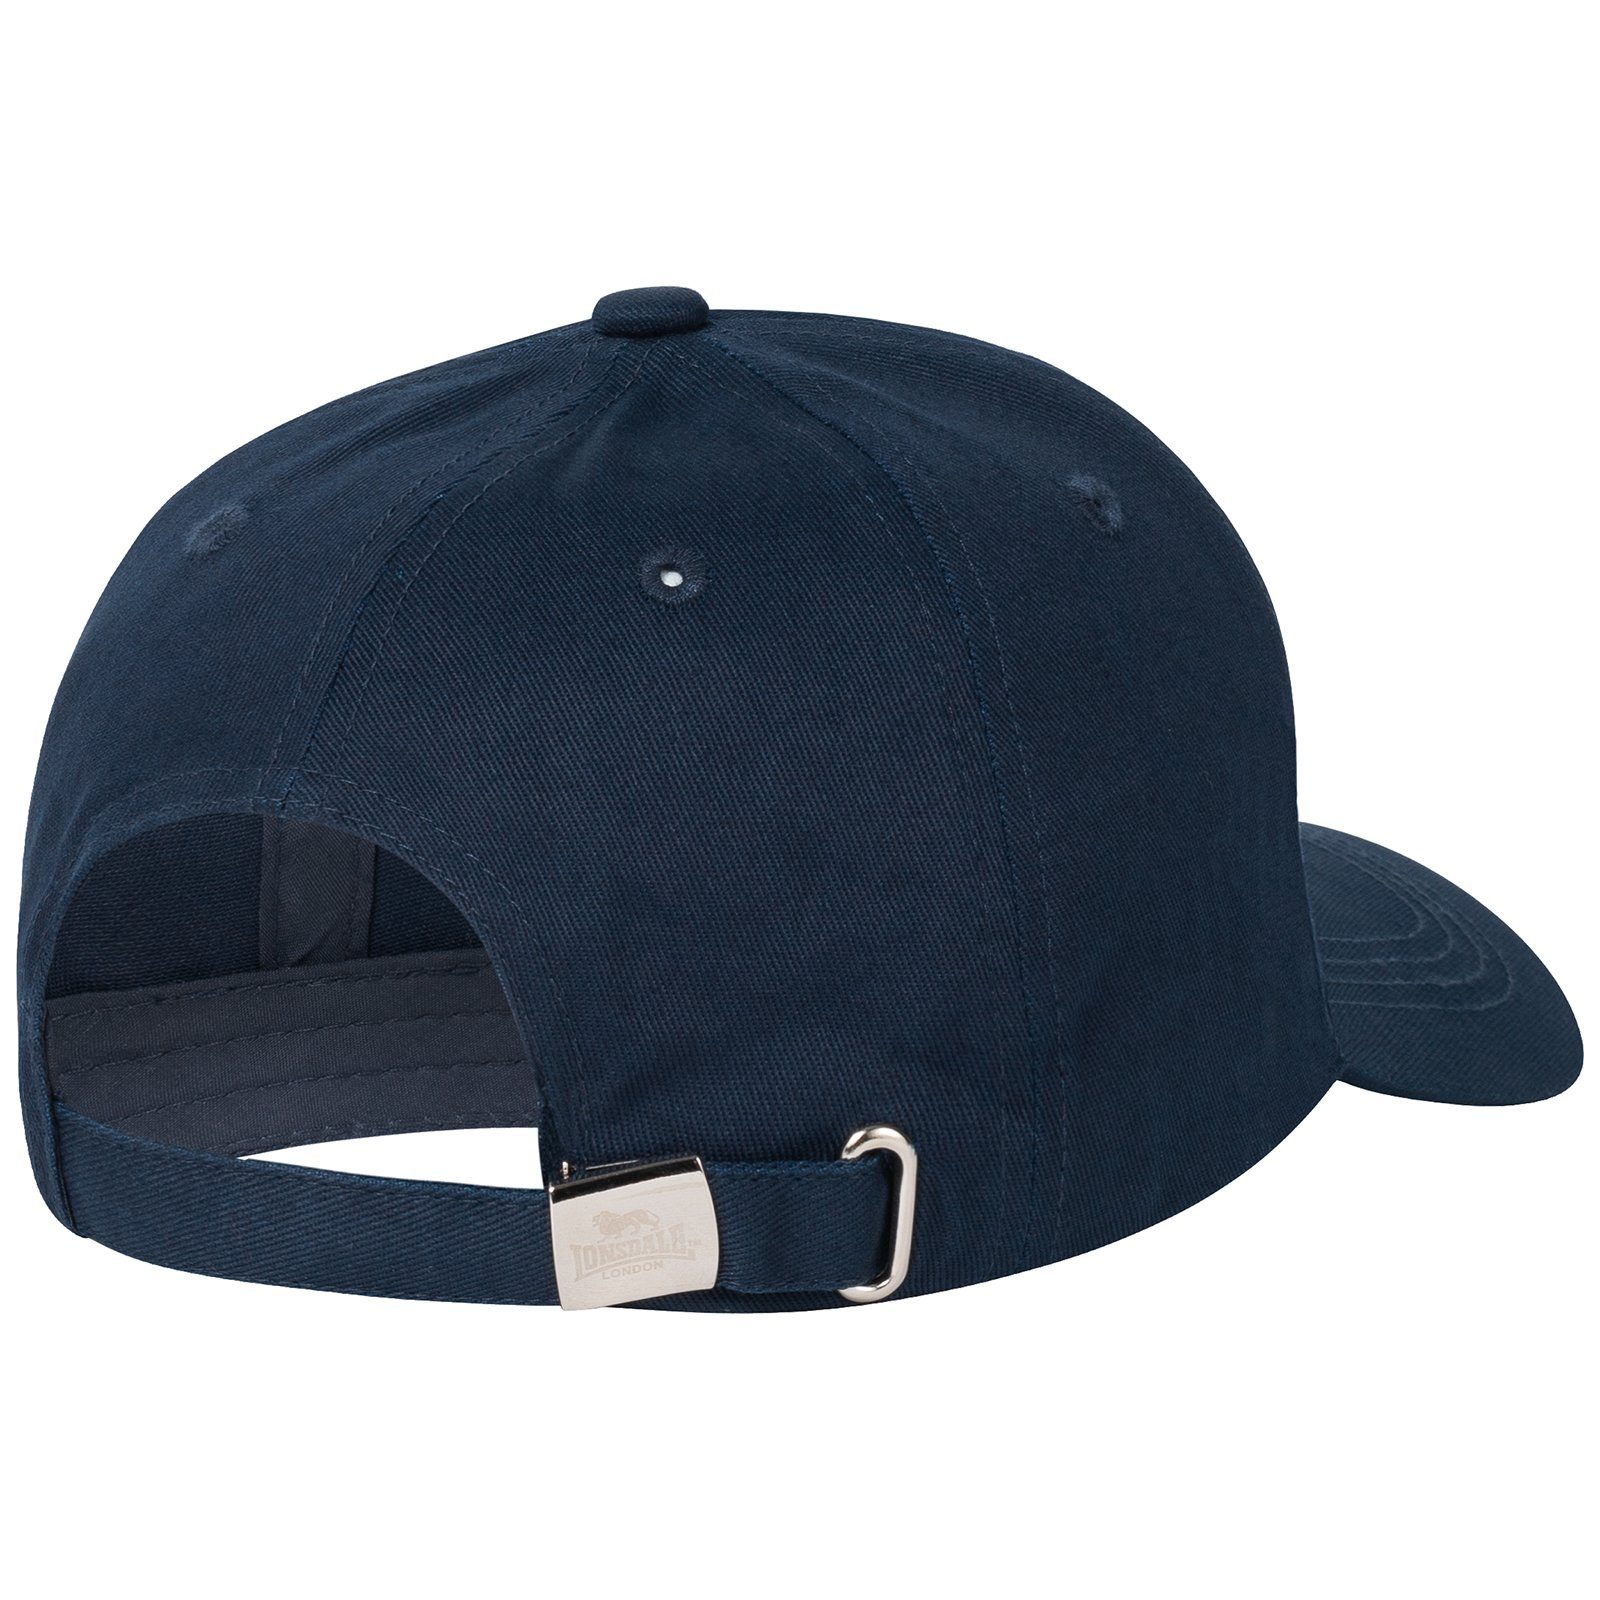 Baseball WILTSHIRE Cap Lonsdale